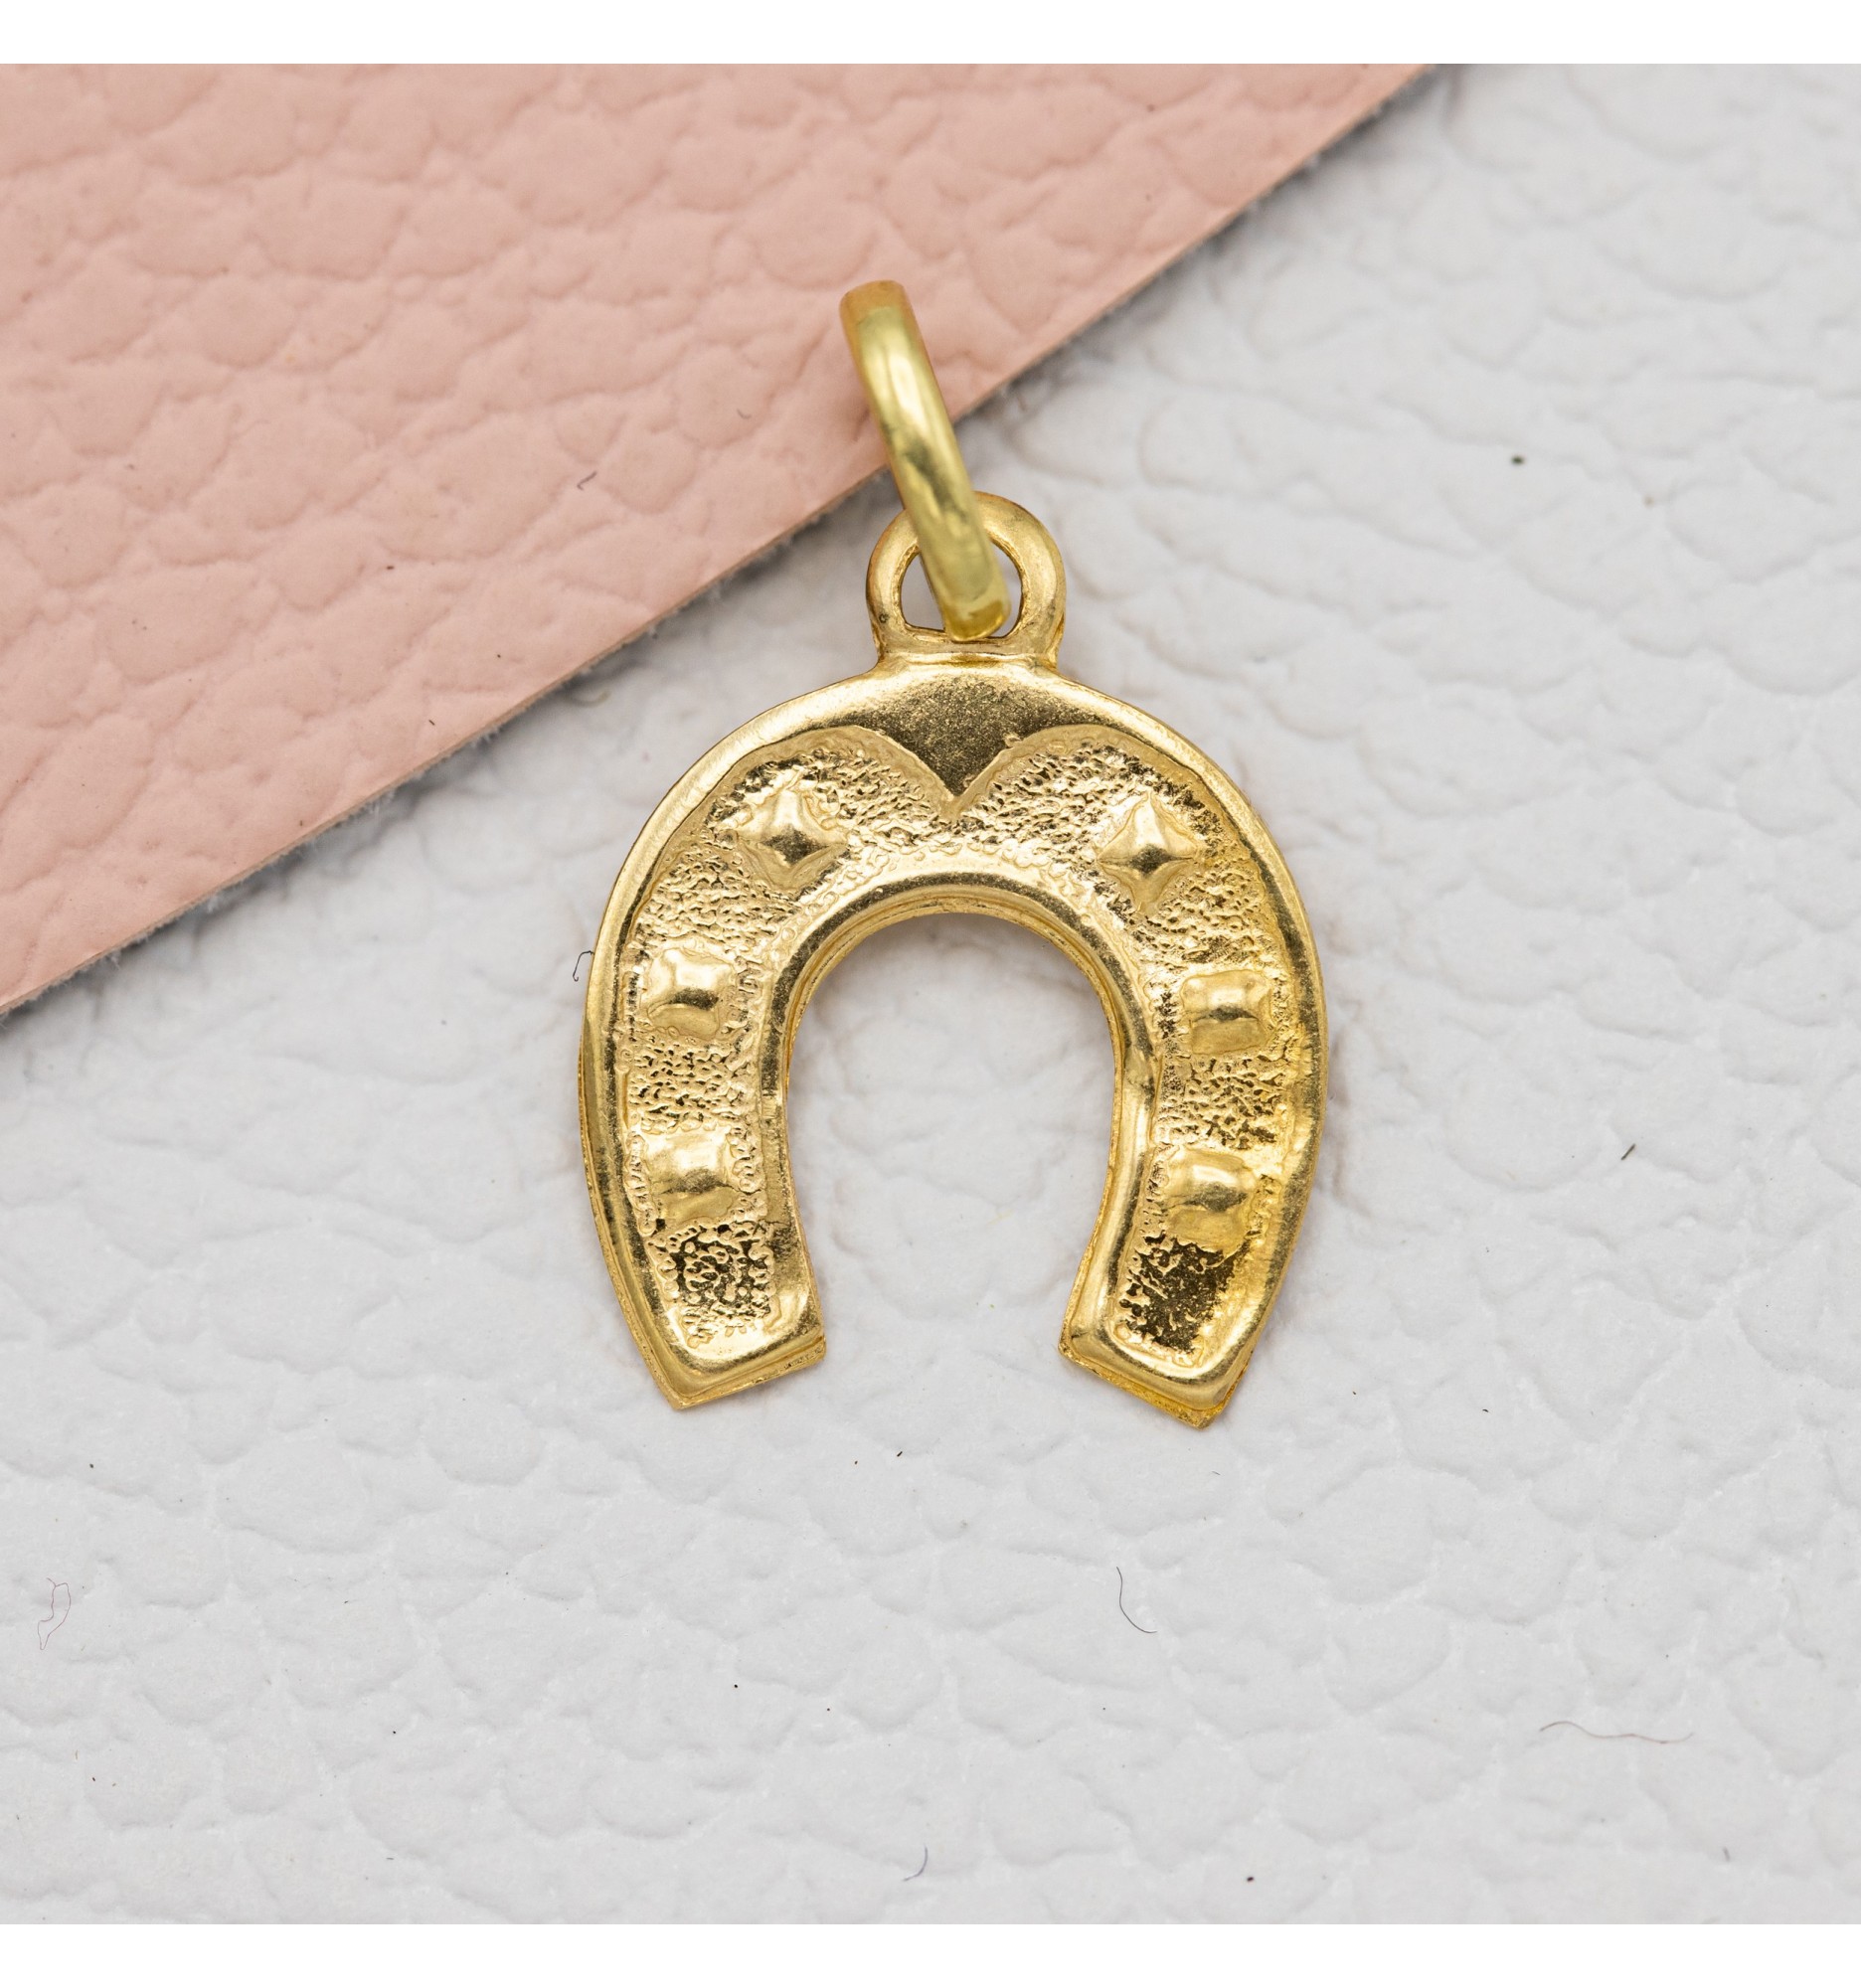 Charlie - 18 ct yellow gold horse shoe pendant - Vintage good luck charm